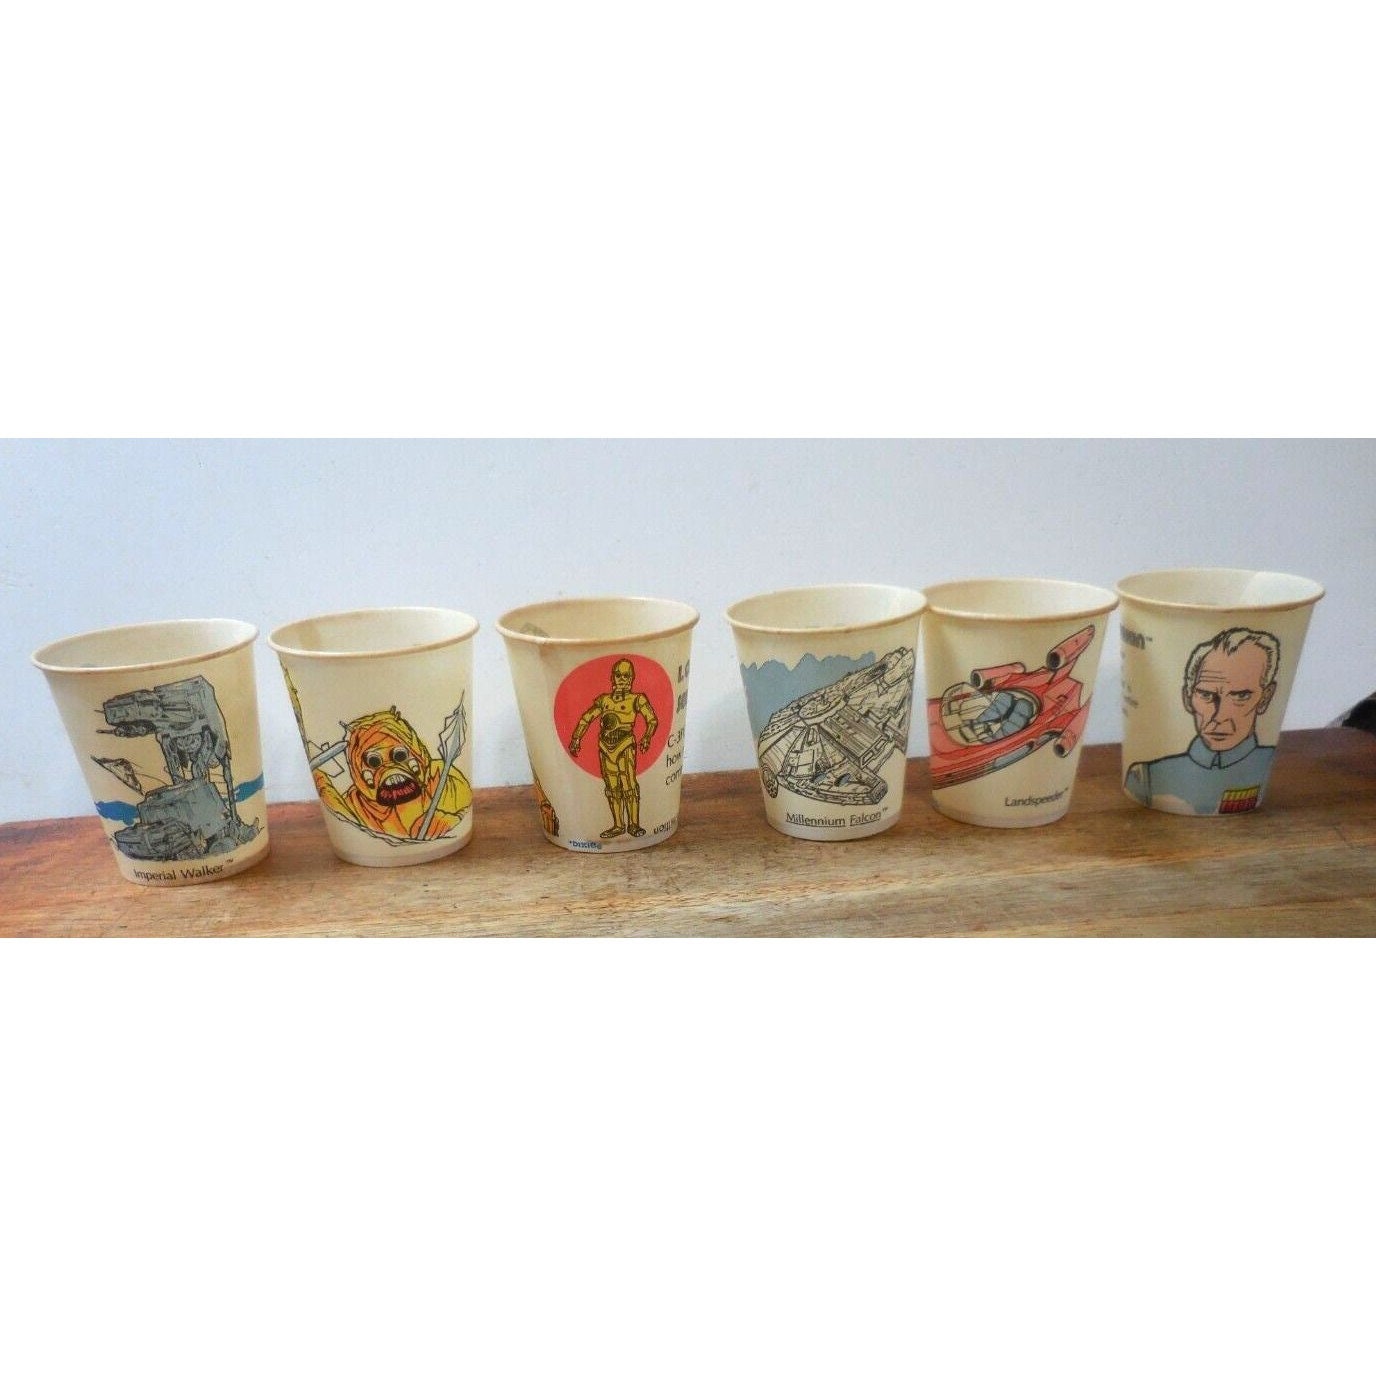 5 Oz Dixie Cups Small 1970s Kitchen / Bathroom Vintage Disposable Paper Cup  priced per Set of 3 or 4 Single Cups 